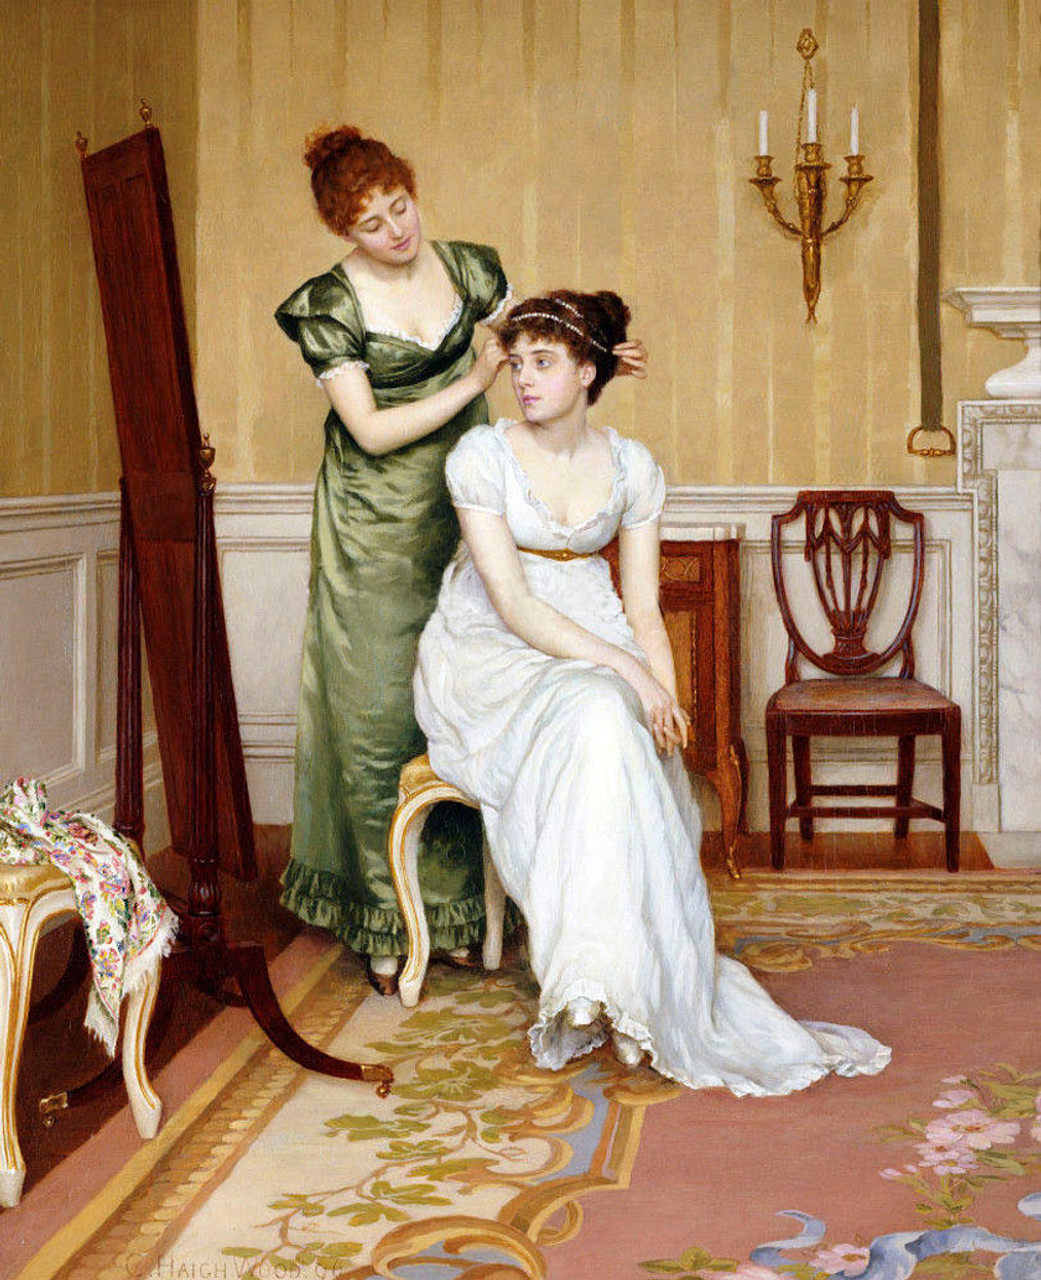 The Finishing Touch By Charles Haigh Wood Reproduction